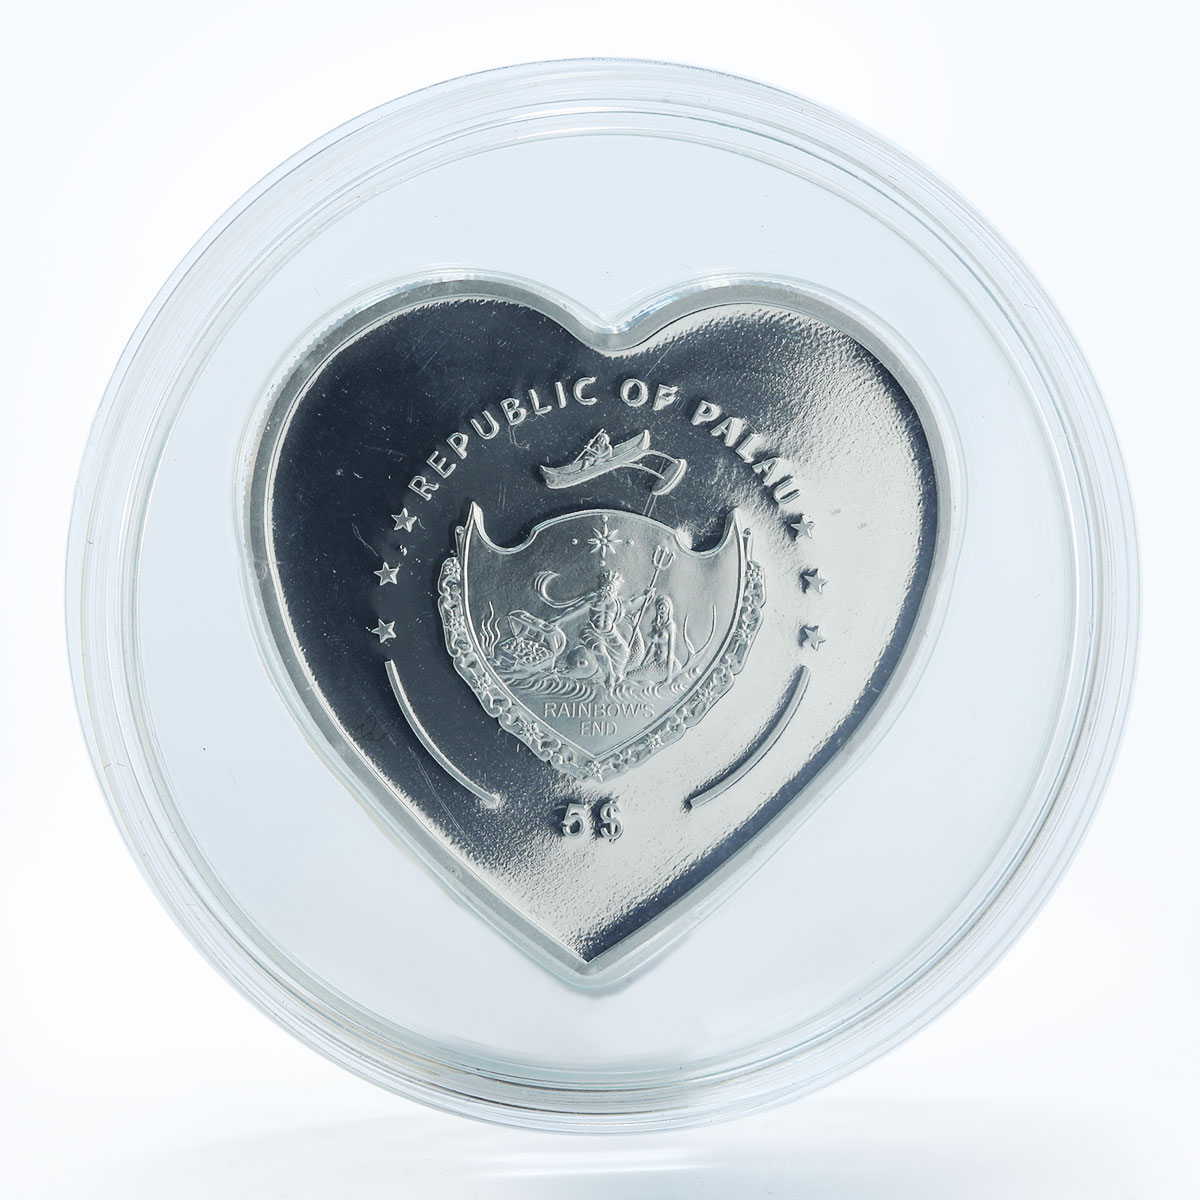 Palau 5 dollars Missing You Kids Angels Heart Swarovski silver proof coin 2009